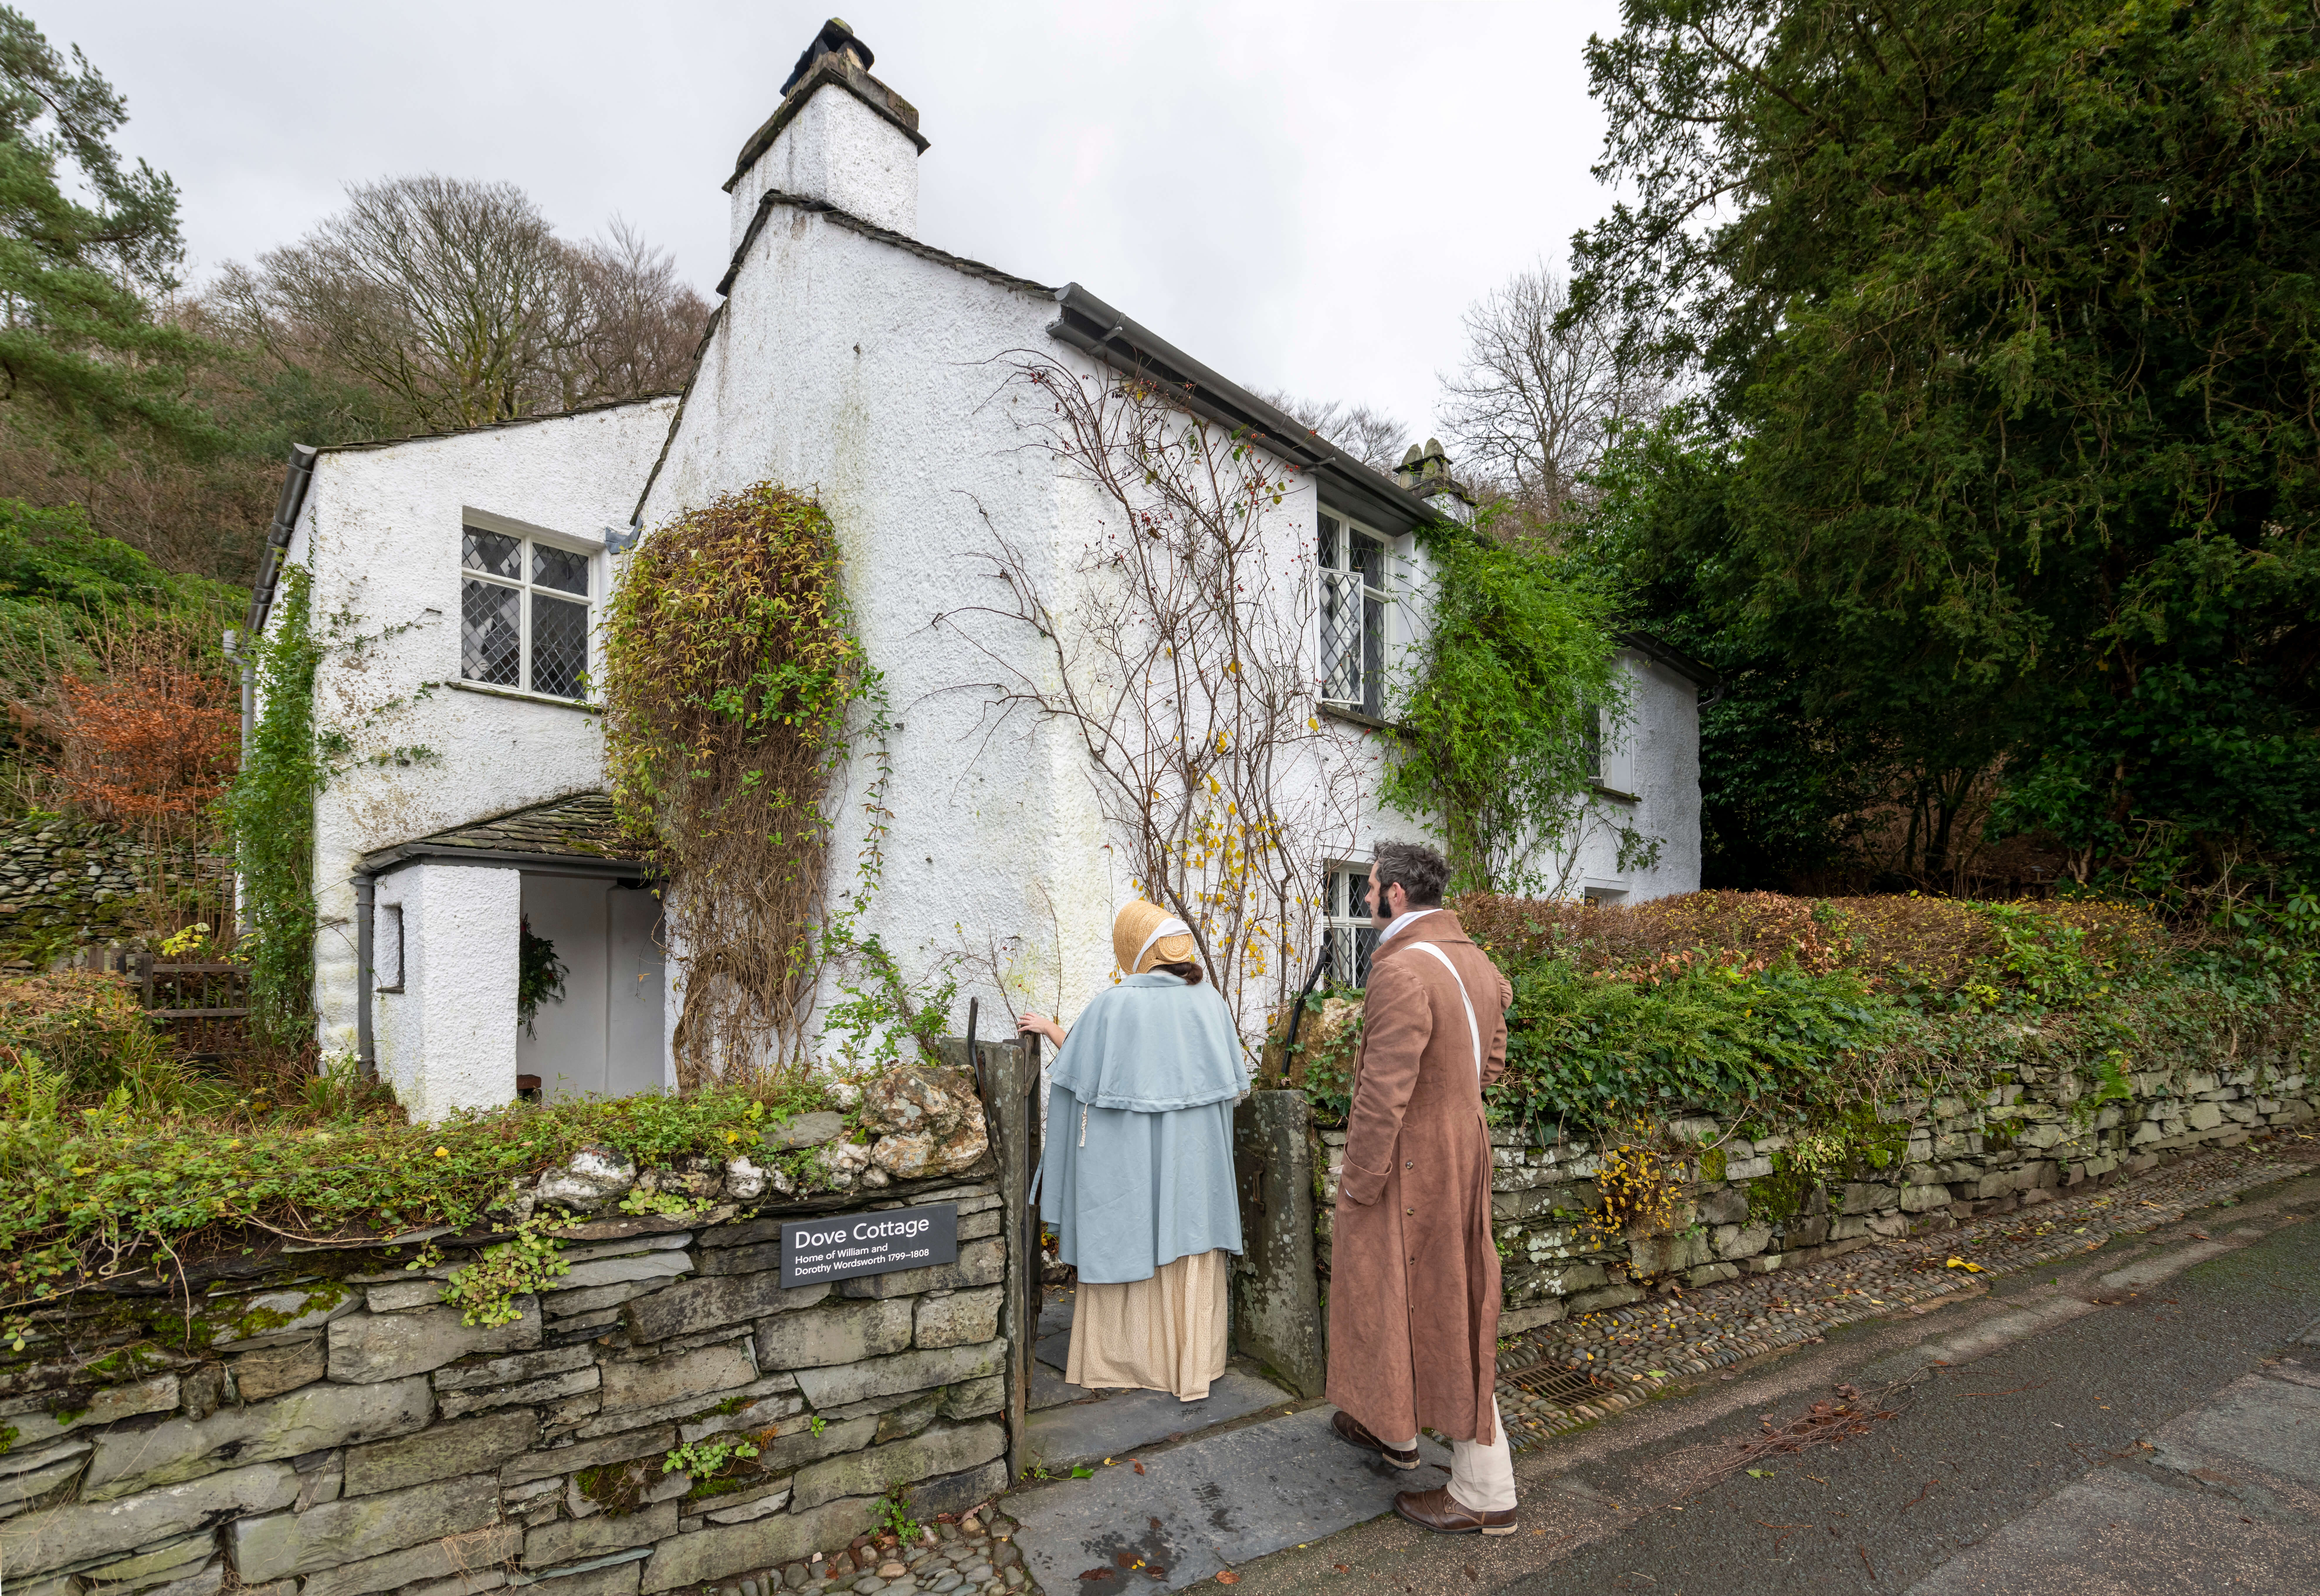 Stagecoach bus trip from Keswick to Grasmere to Dove Cottage, best known as the home of the poet William Wordsworth and his sister Dorothy Wordsworth. Seb Coombes and Georgina Harland as William and Dorothy at Dove Cottage in Grasmere.